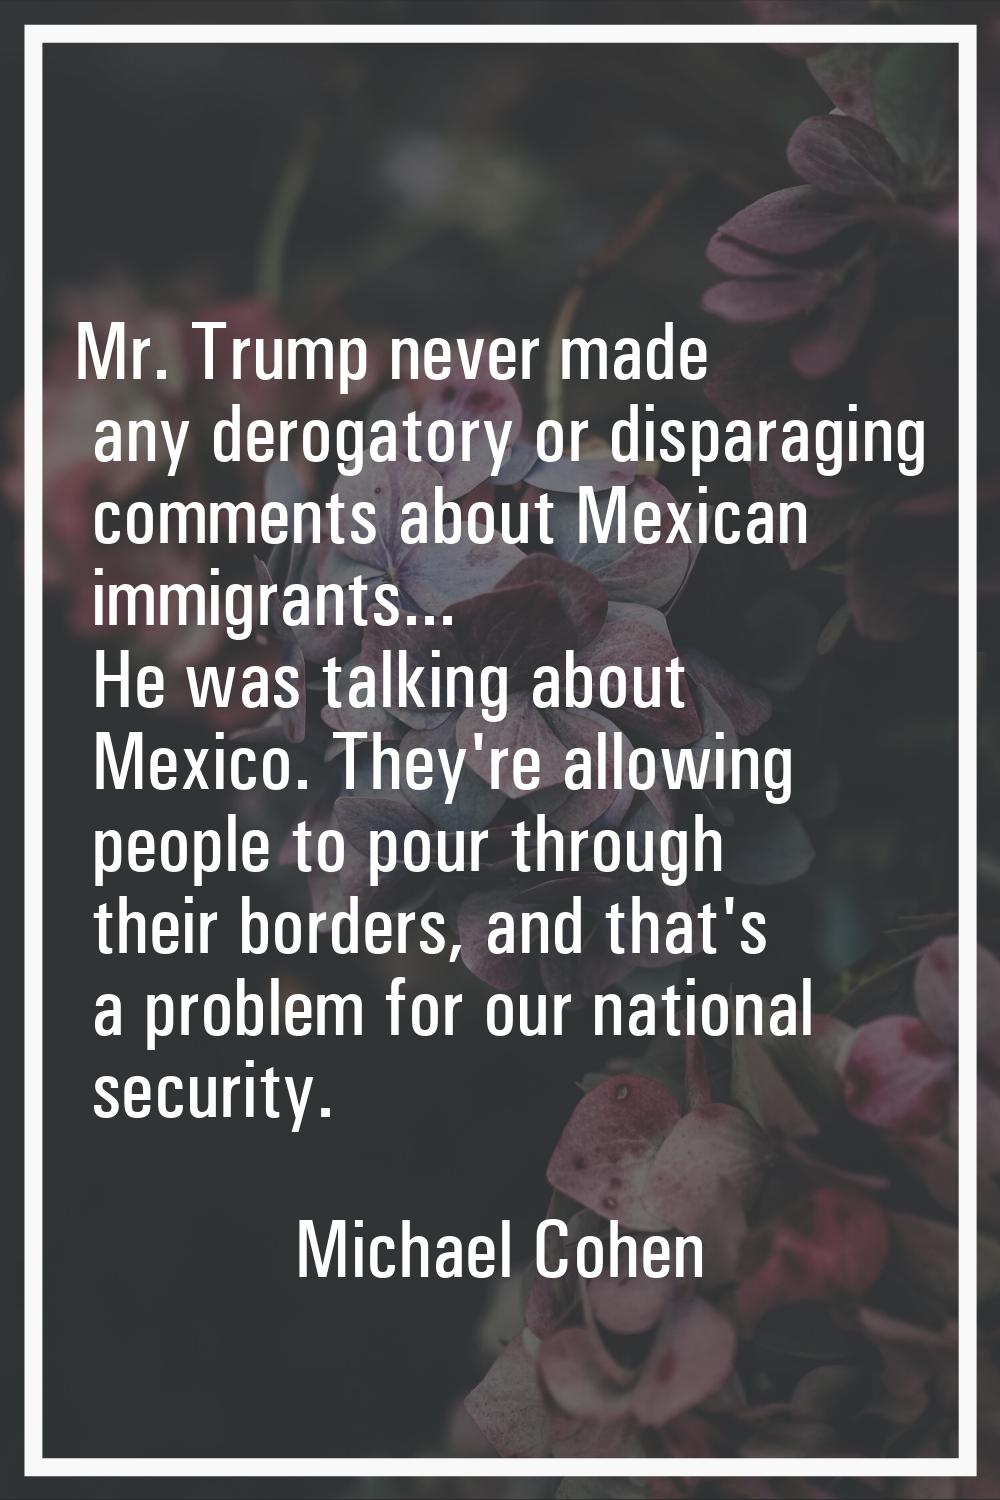 Mr. Trump never made any derogatory or disparaging comments about Mexican immigrants... He was talk